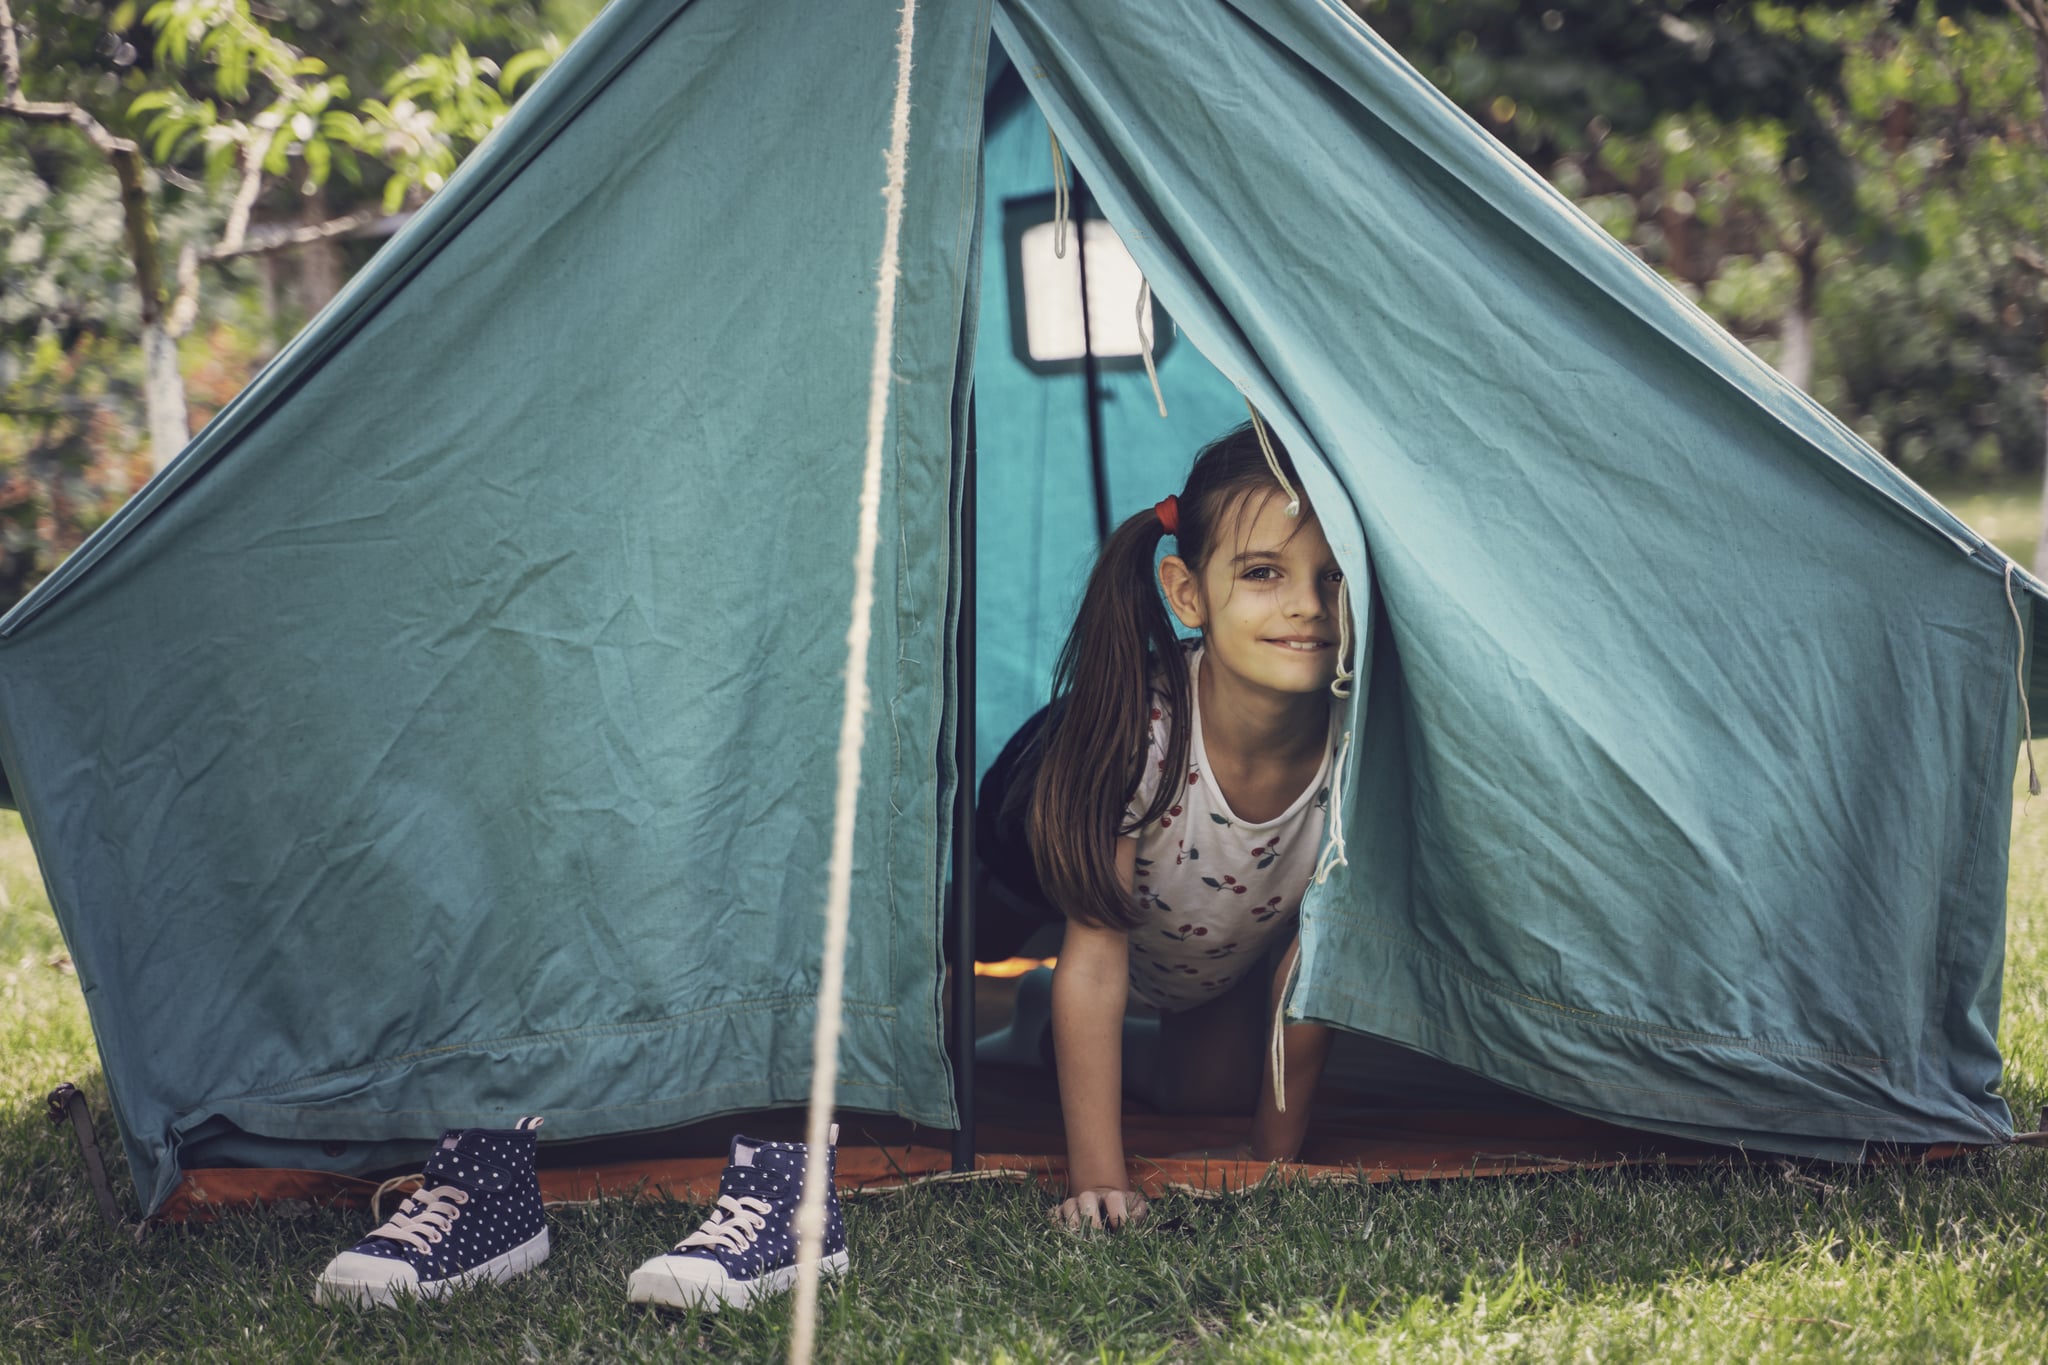 Cute girl playing in tent. Garden party. Summer fun. Child.